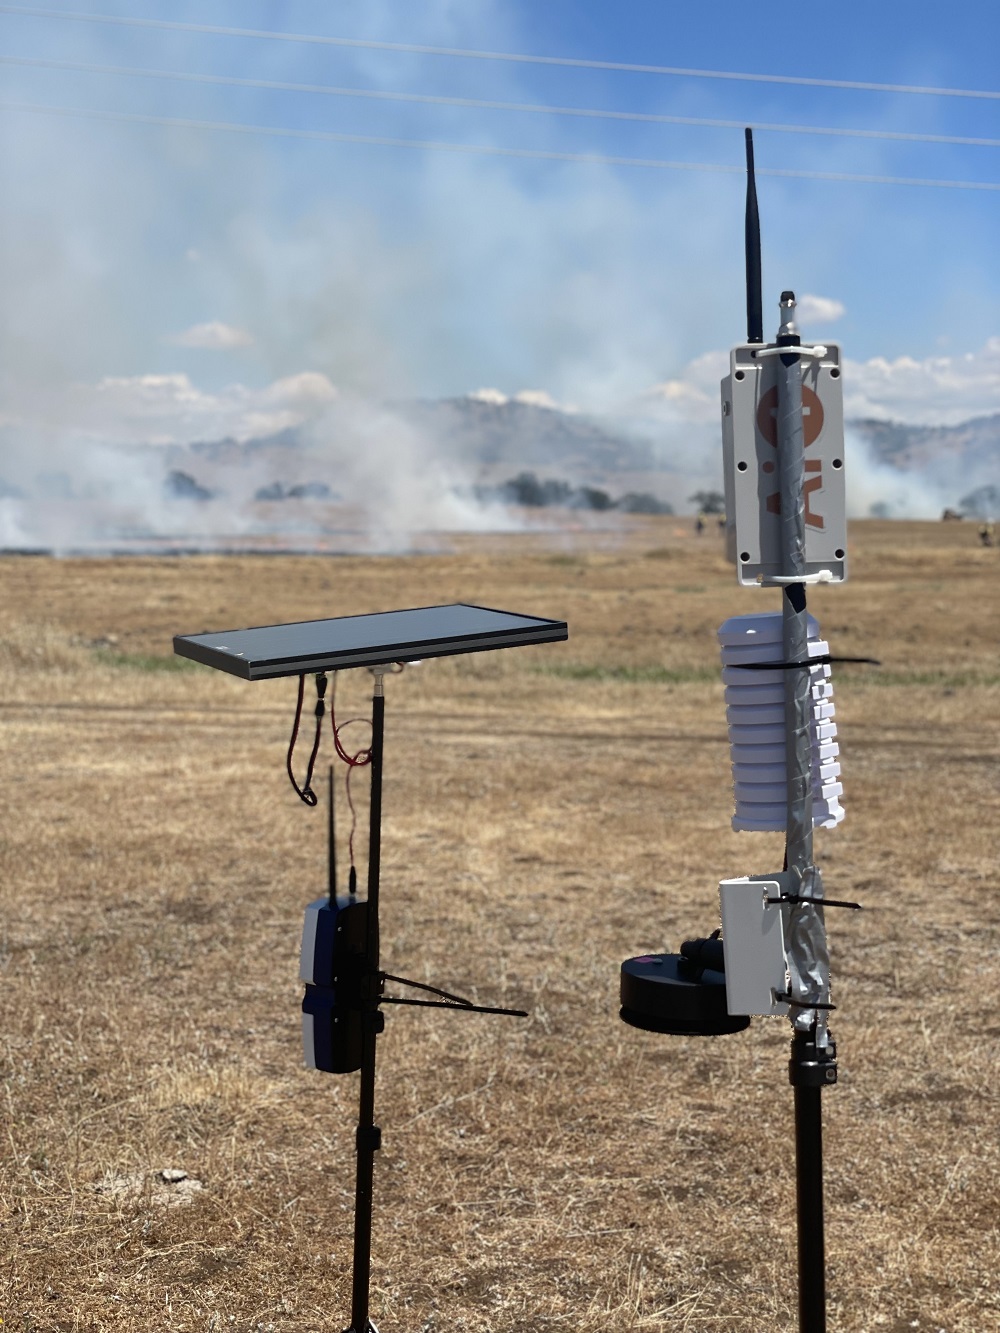 Two prototype fire sensors are shown in the foreground during a June 2021 field test in California.